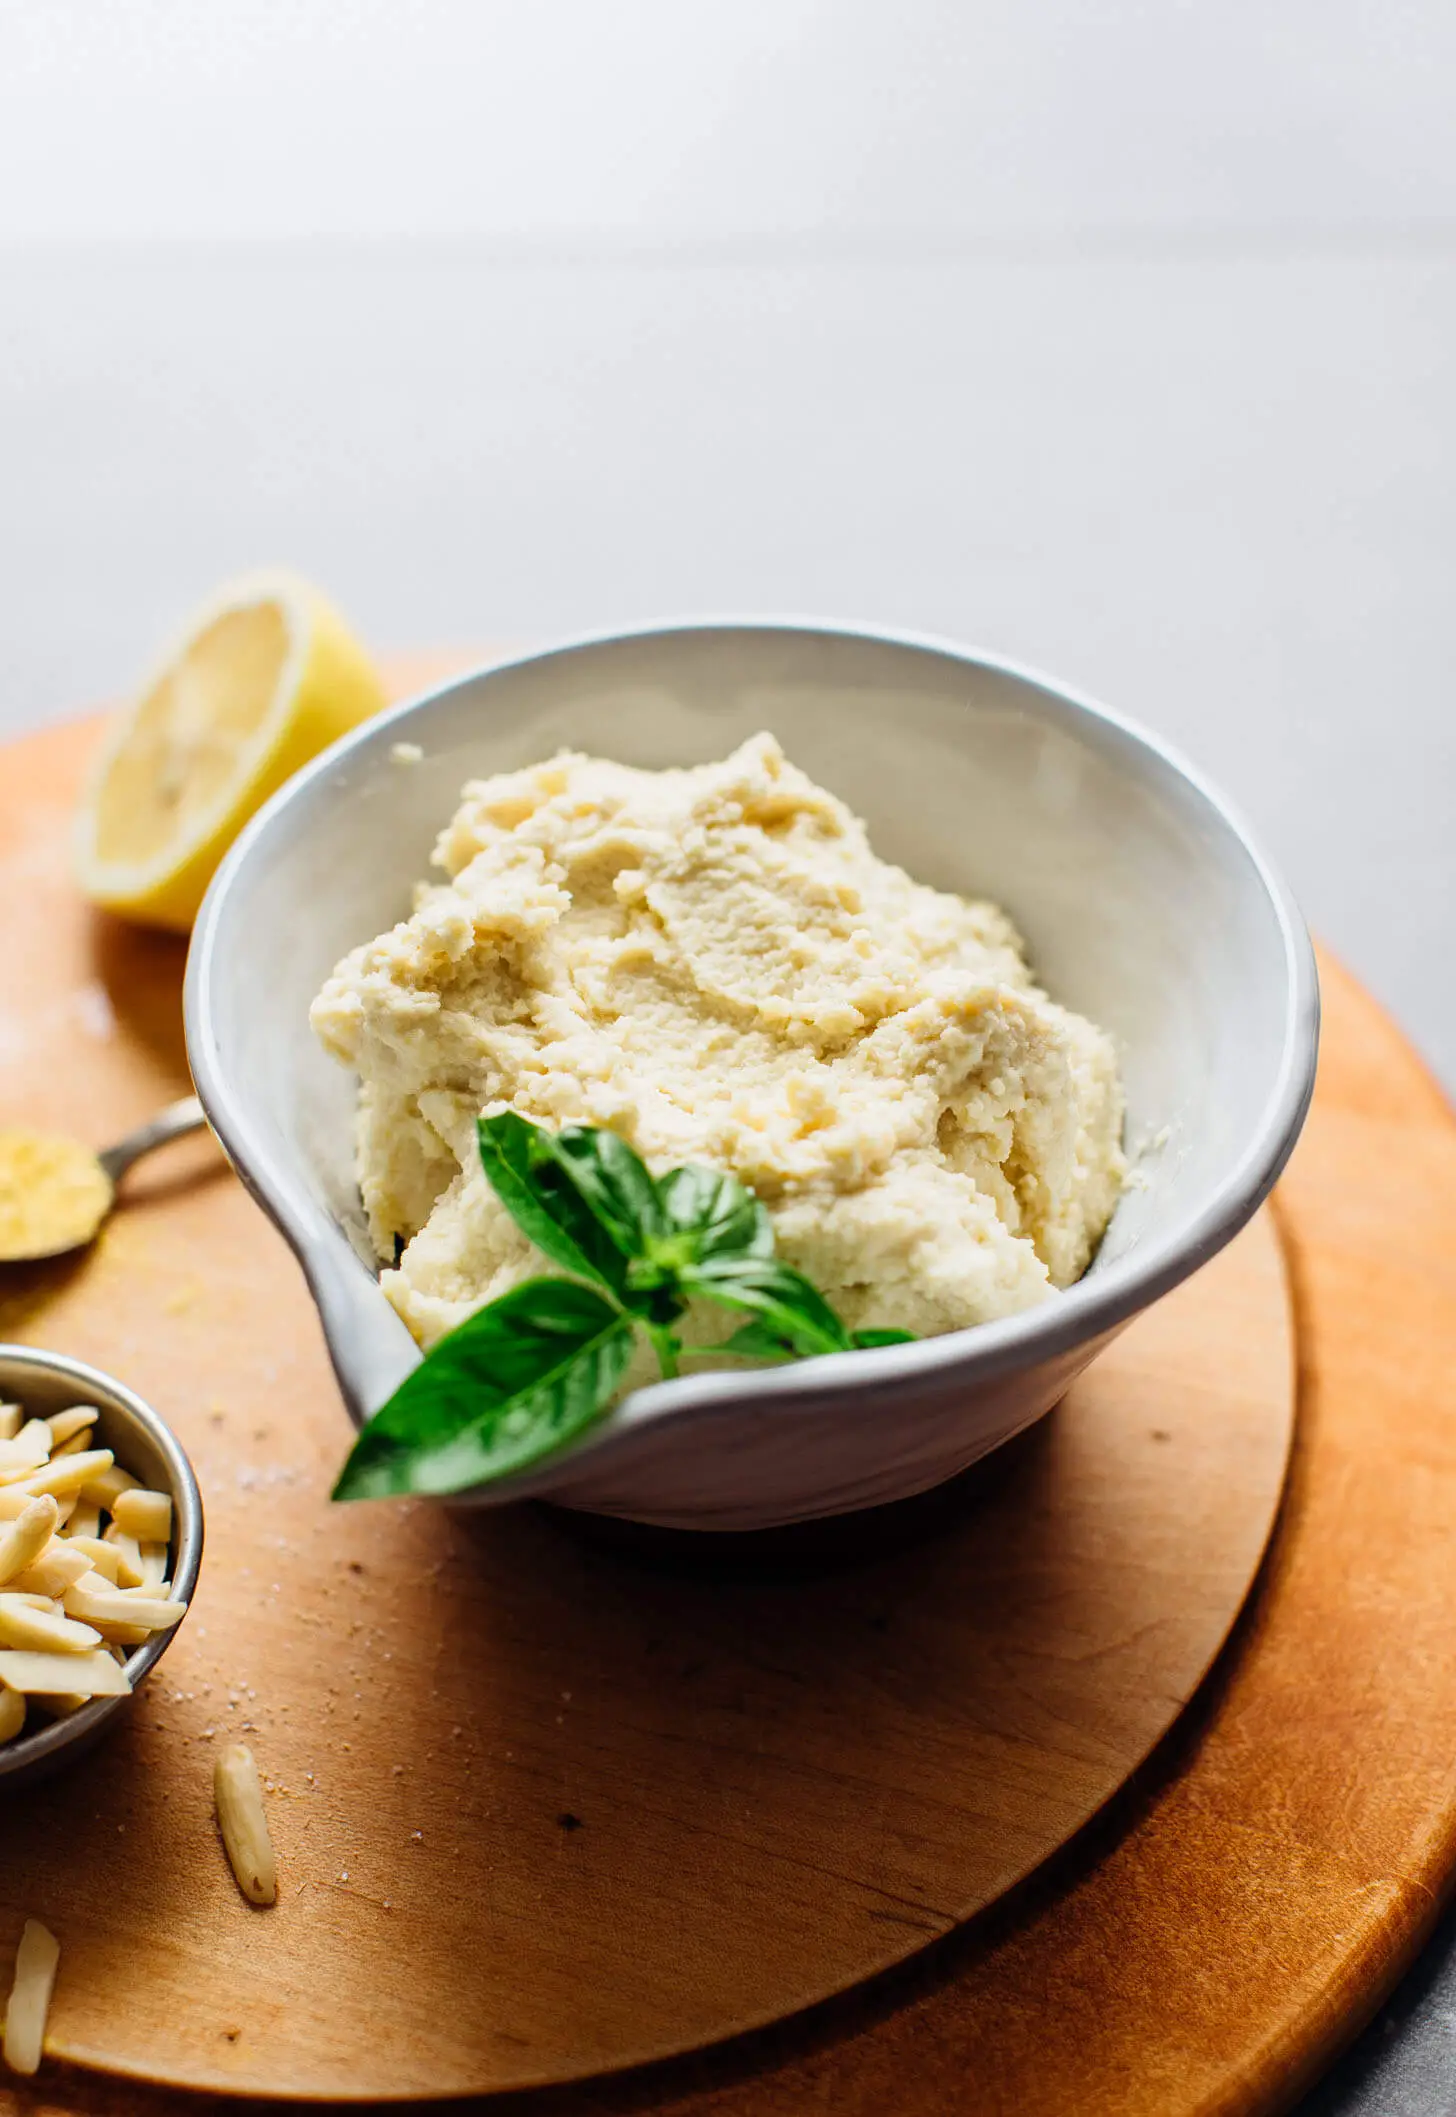 How to Make and Buy the Best Vegan Ricotta